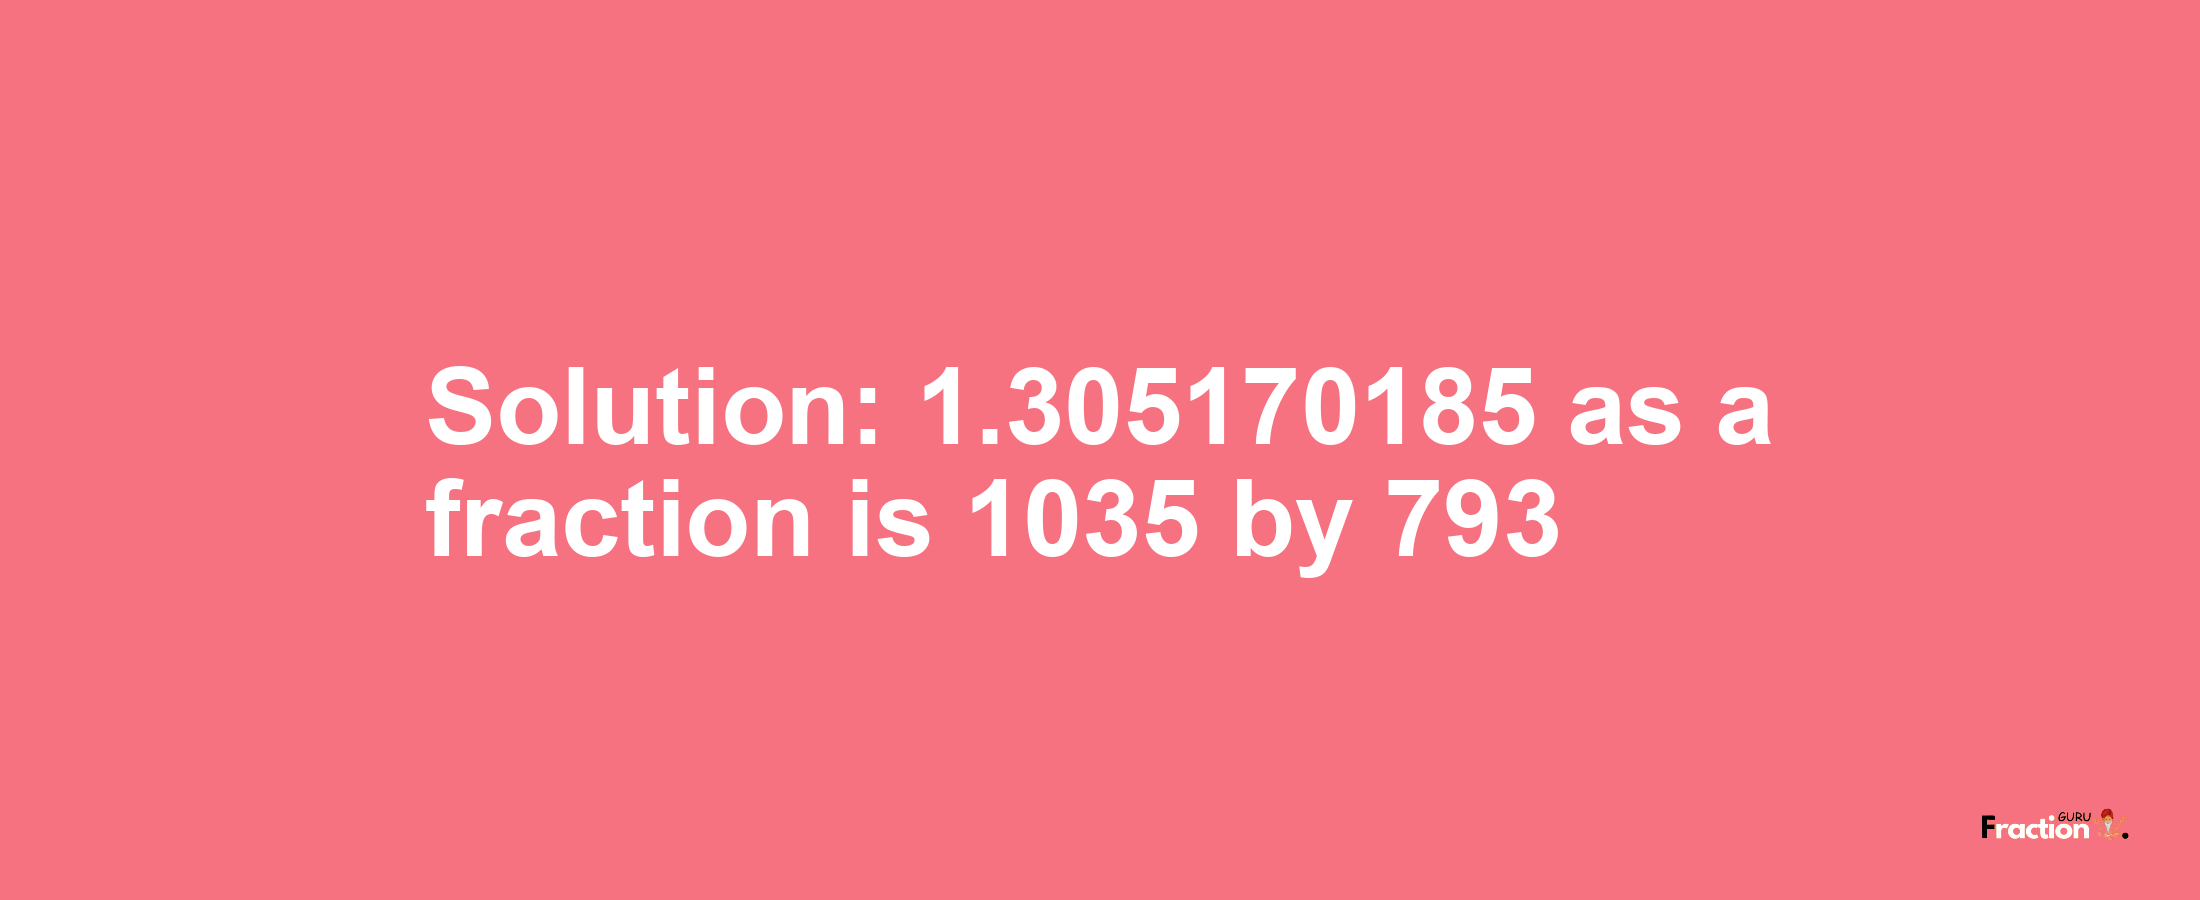 Solution:1.305170185 as a fraction is 1035/793